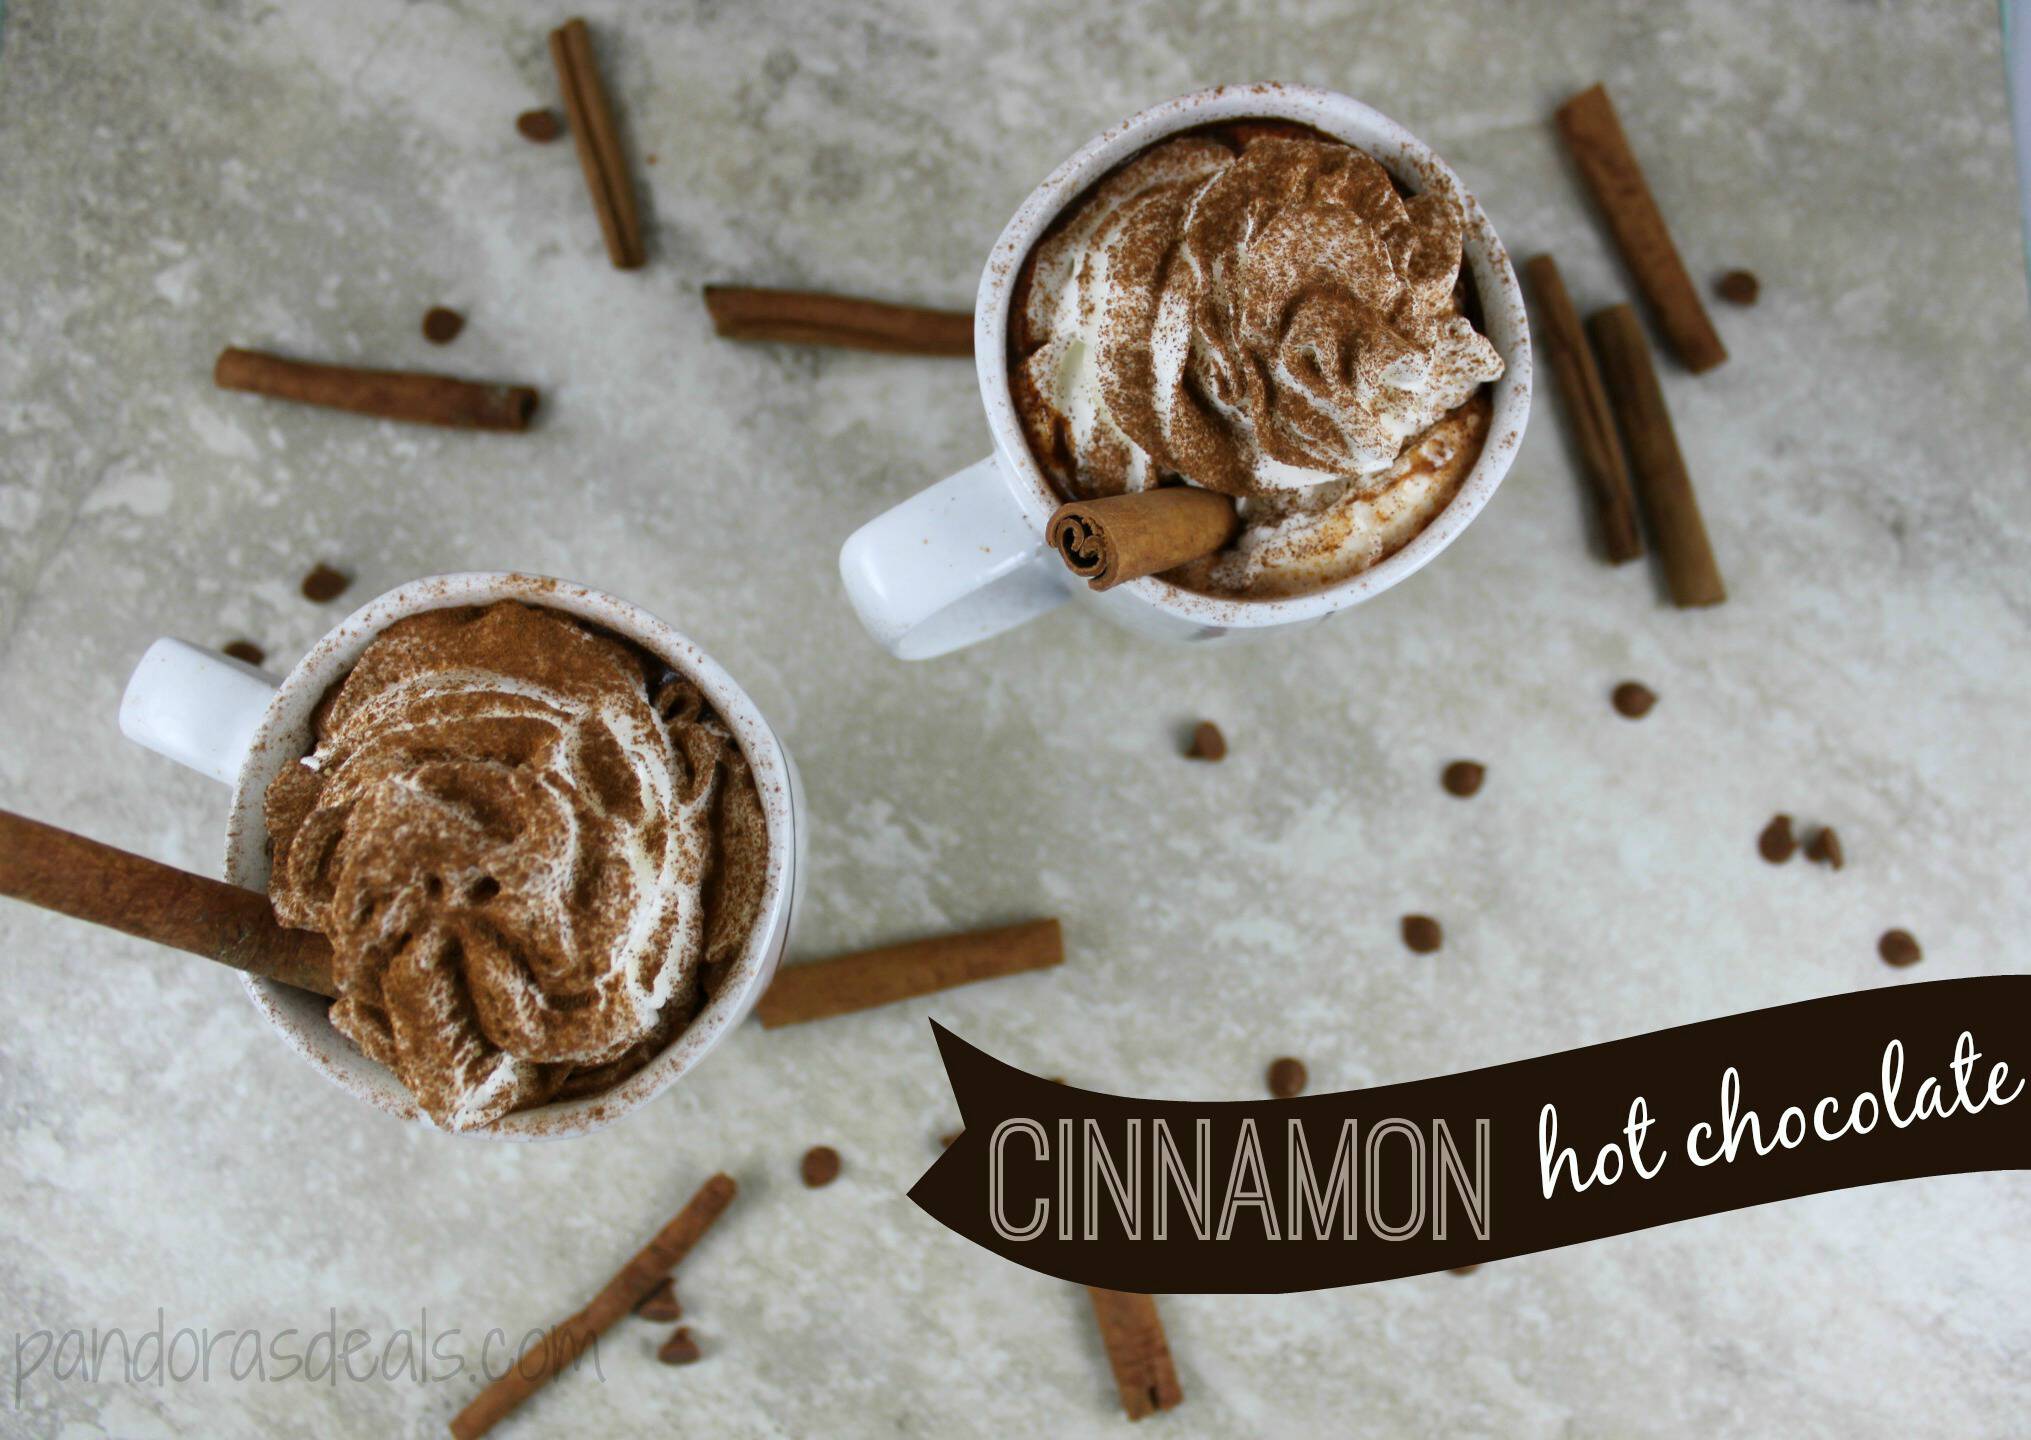 This Cinnamon Hot Chocolate Recipe is really simple to make and soooo sweet and yummy! It's perfect for a cold day. My kids slurped it down so fast!